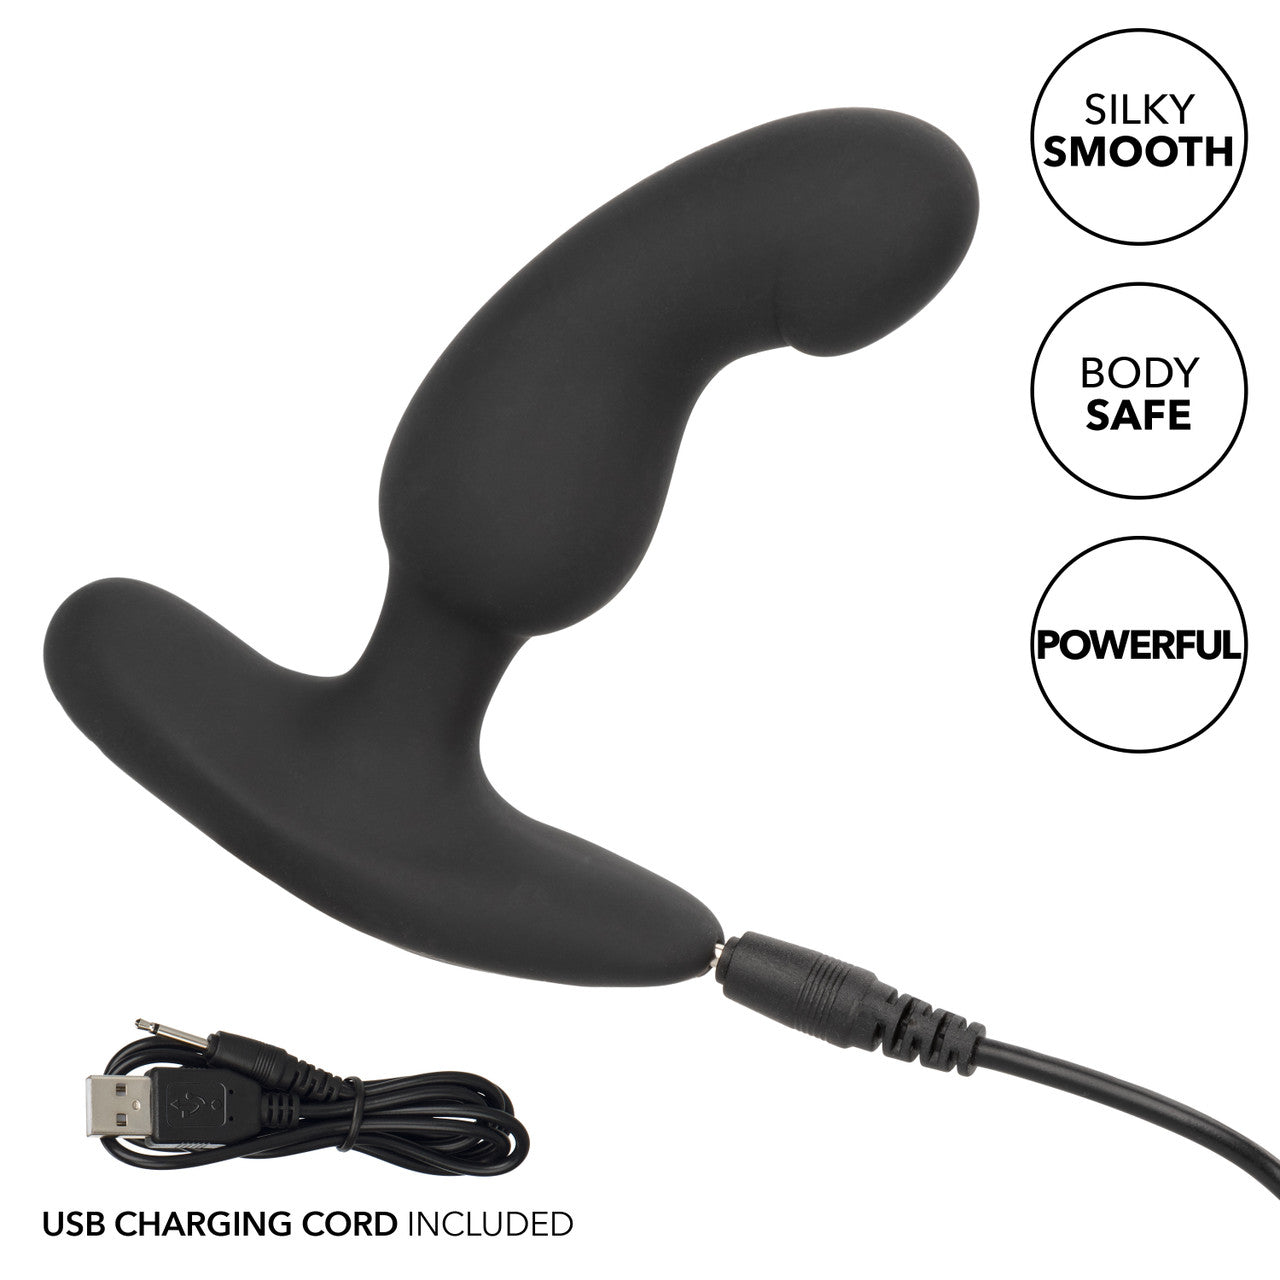 Rechargeable Curved Probe